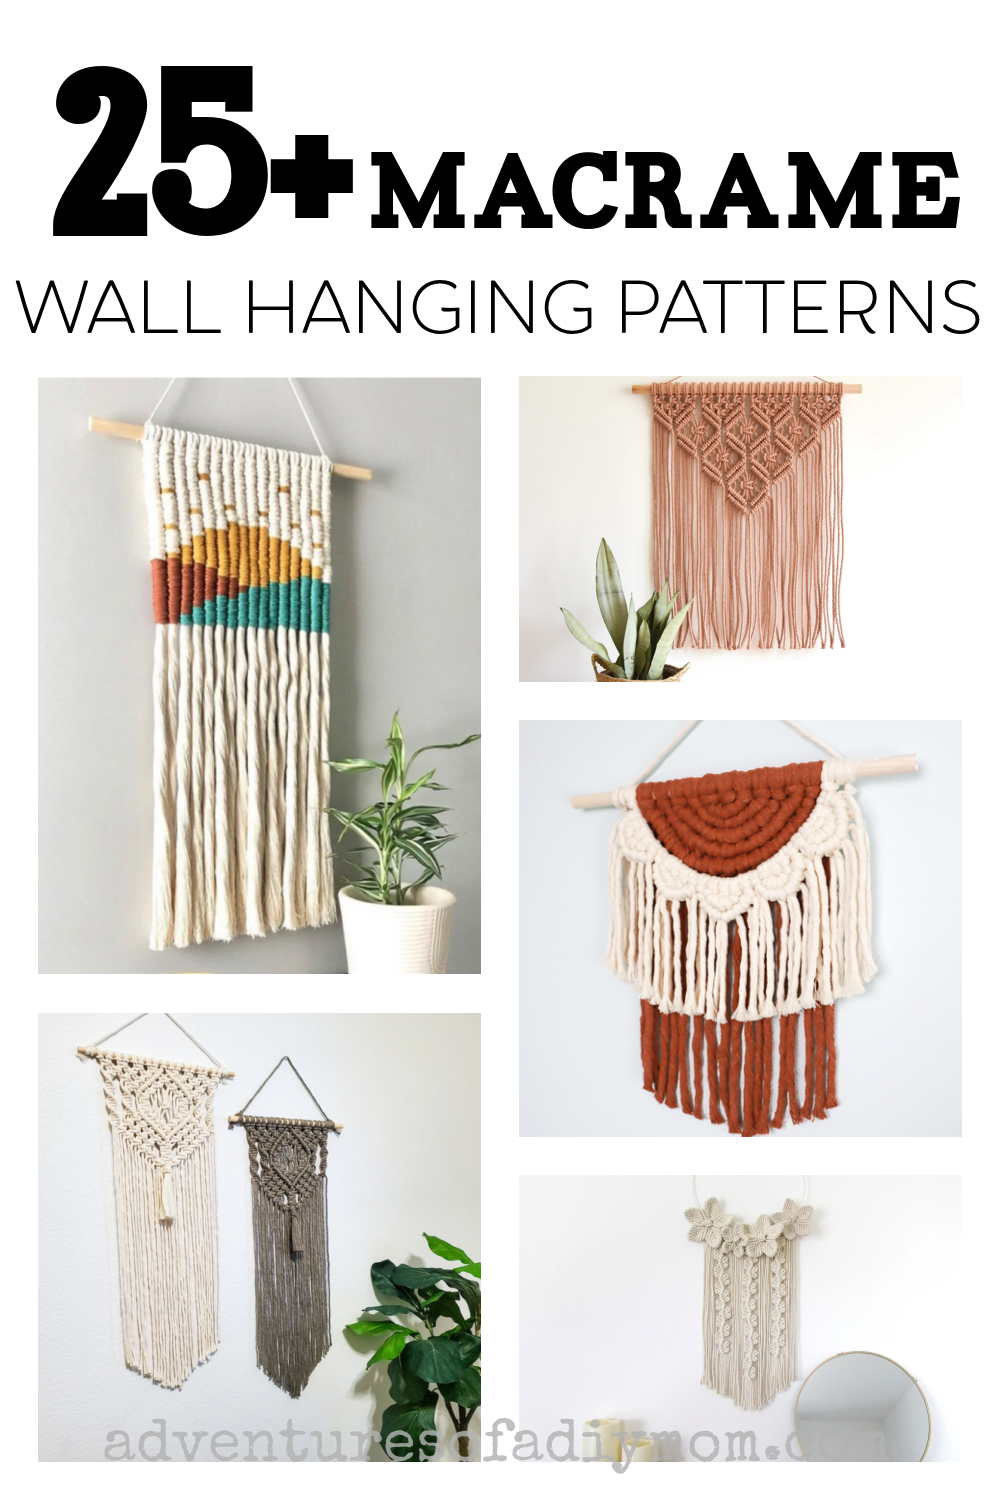 25+ Macrame Wall Hanging Patterns - Adventures of a DIY Mom